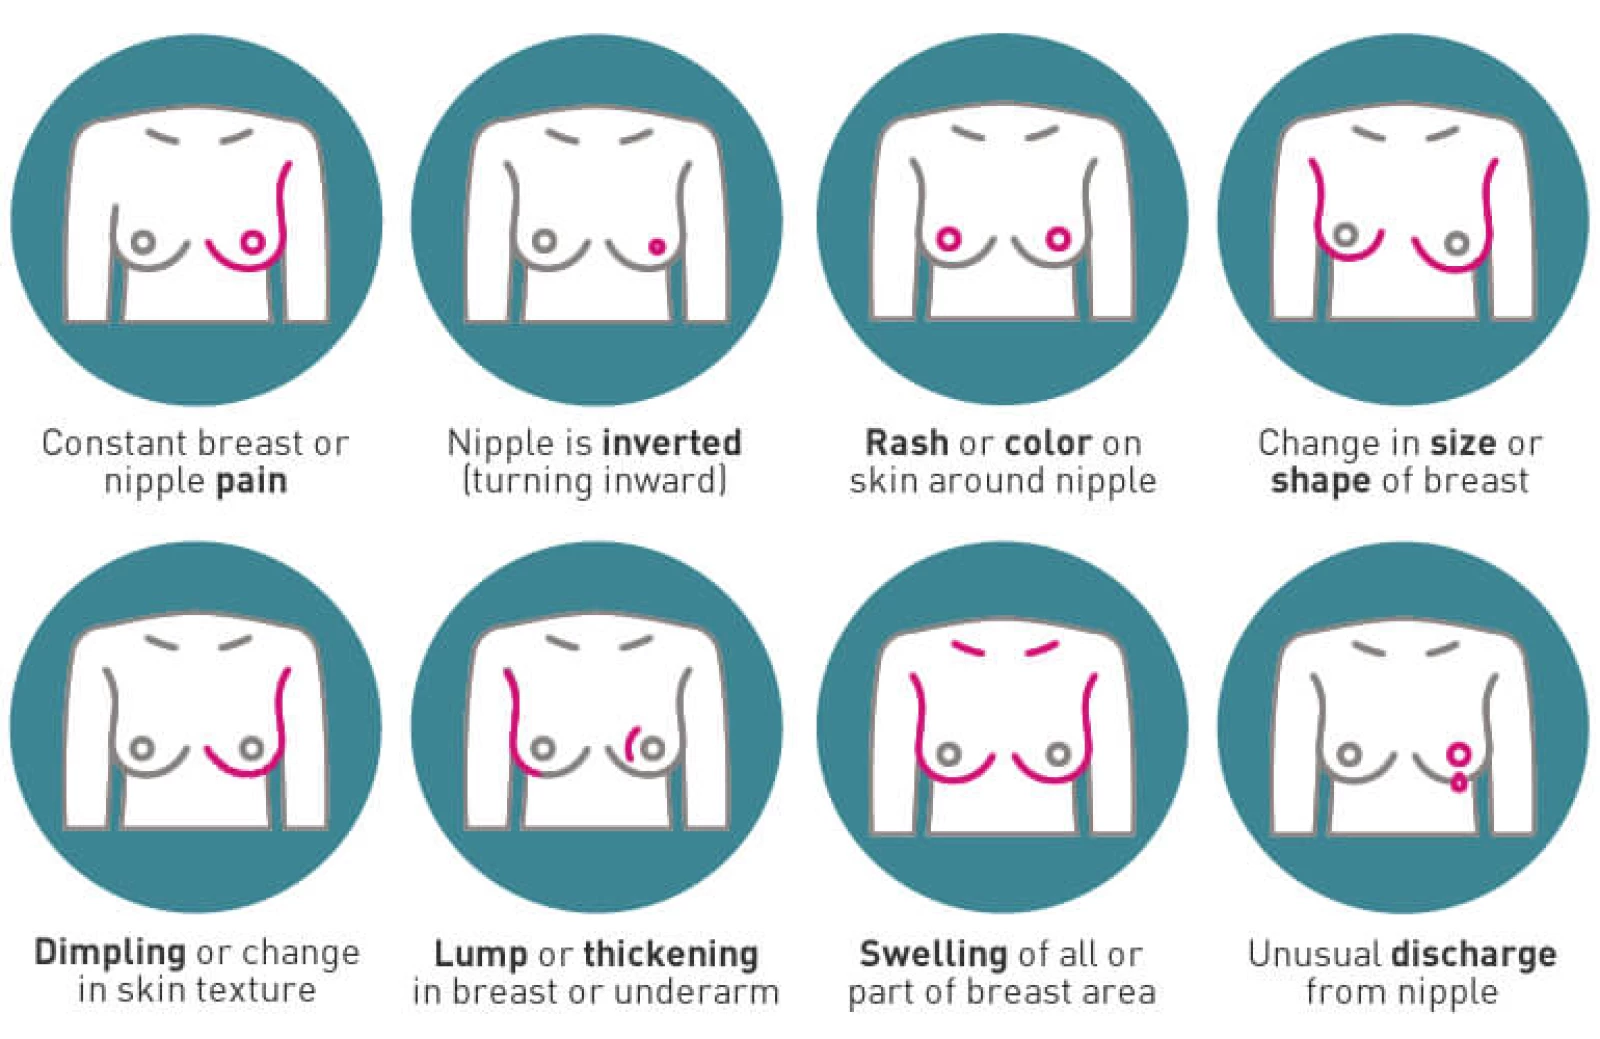 ALL ABOUT SHAPE OF BREAST